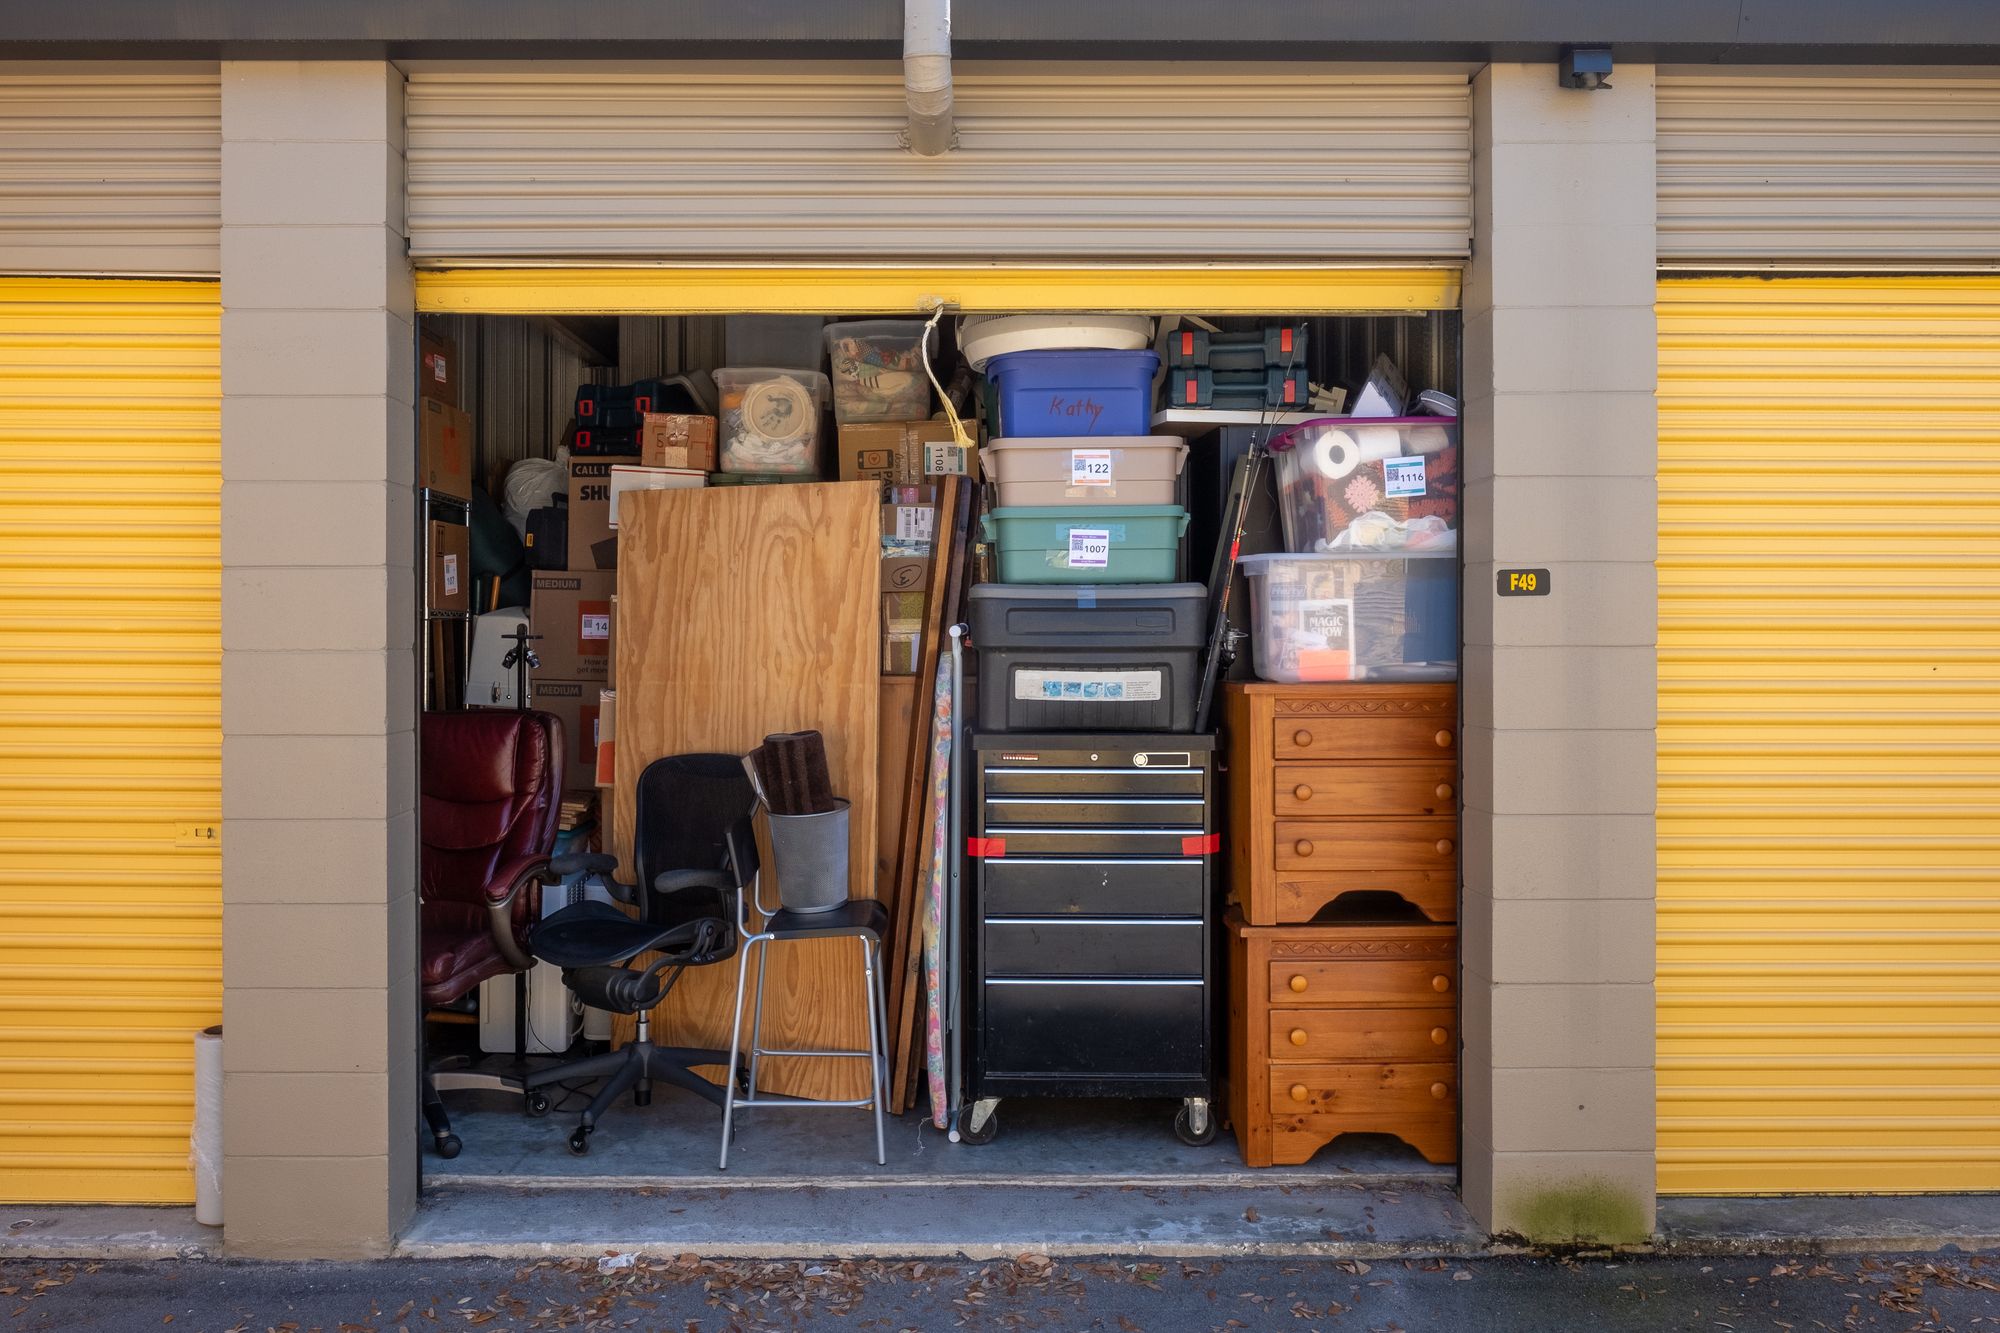 Storage Unit Costs: How To Find the Best Deals